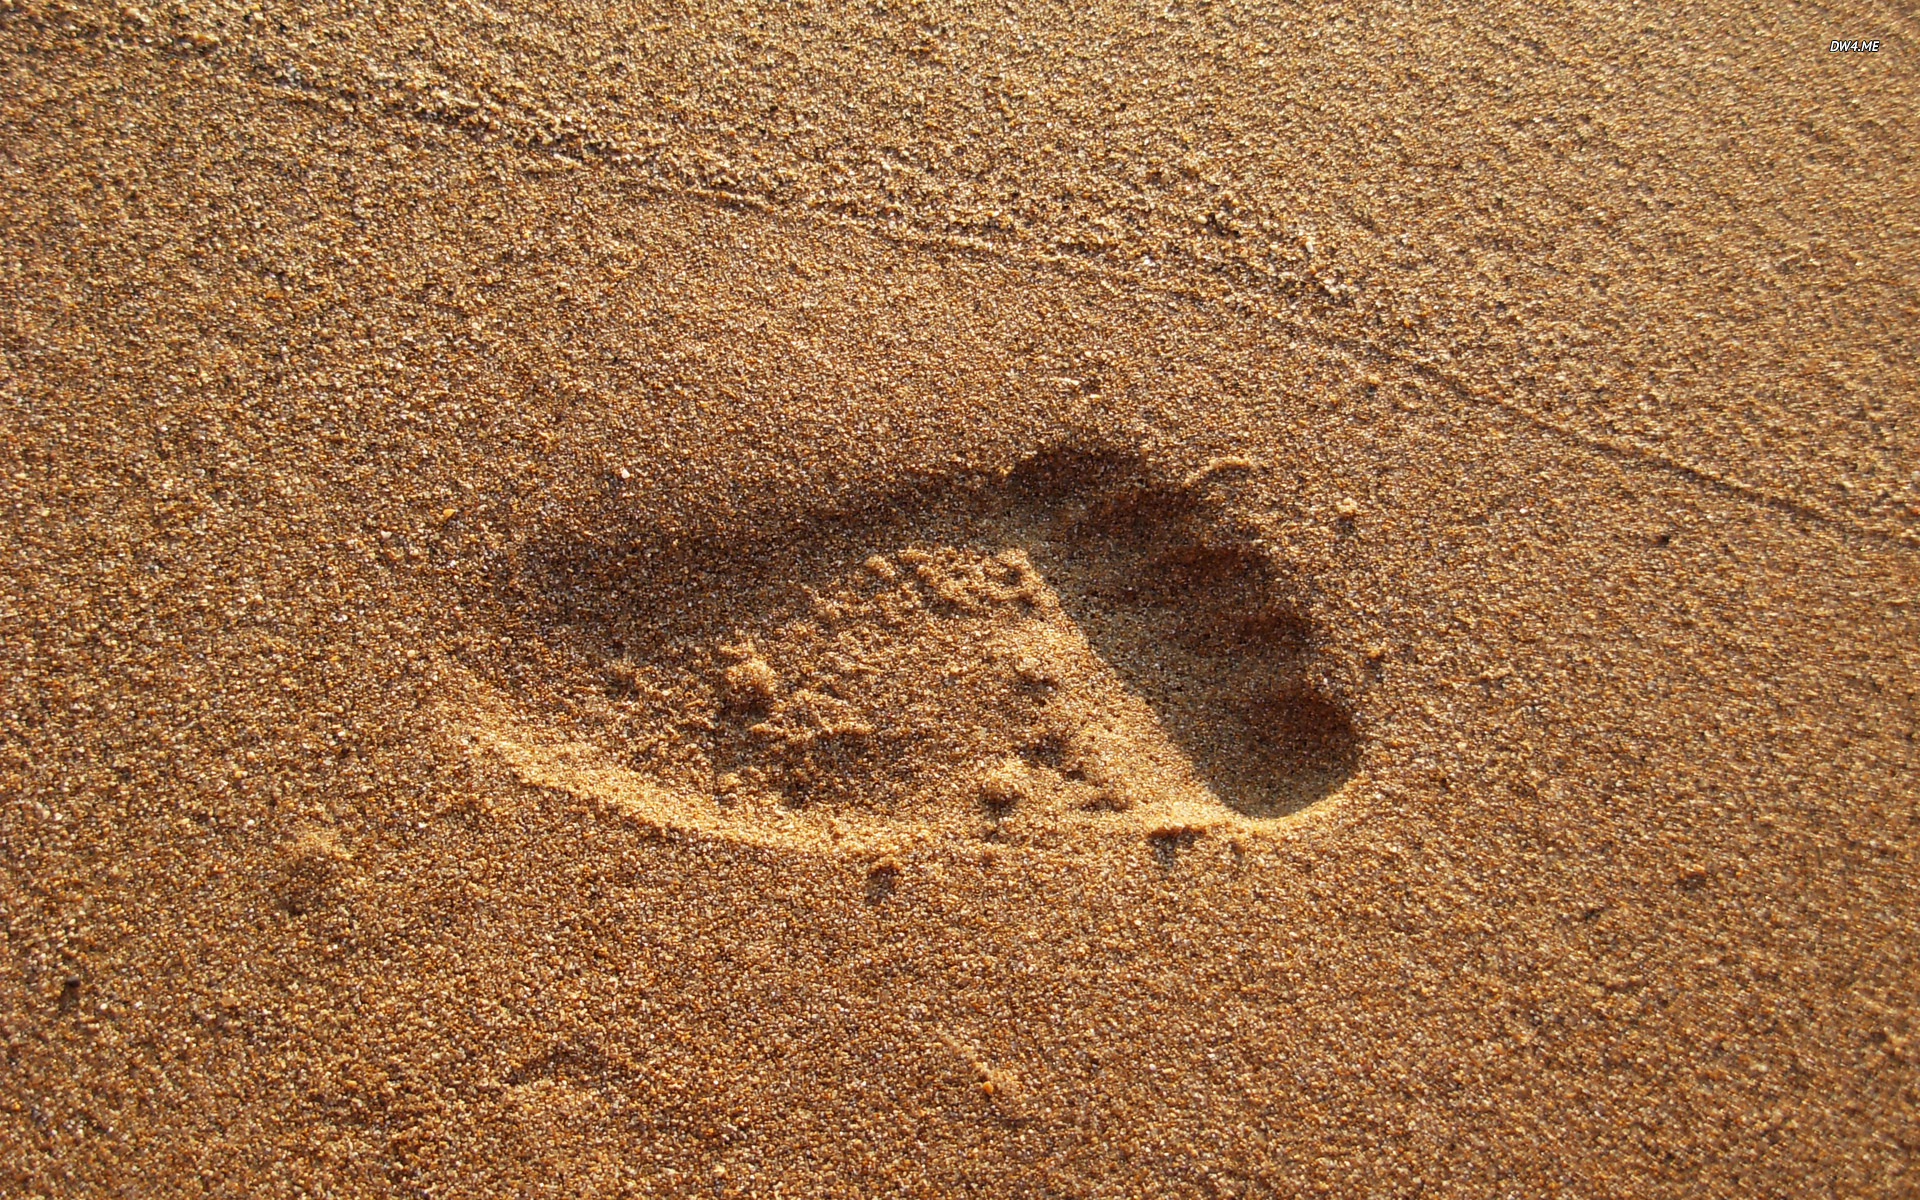 Footprint in the sand wallpaper   Photography wallpapers